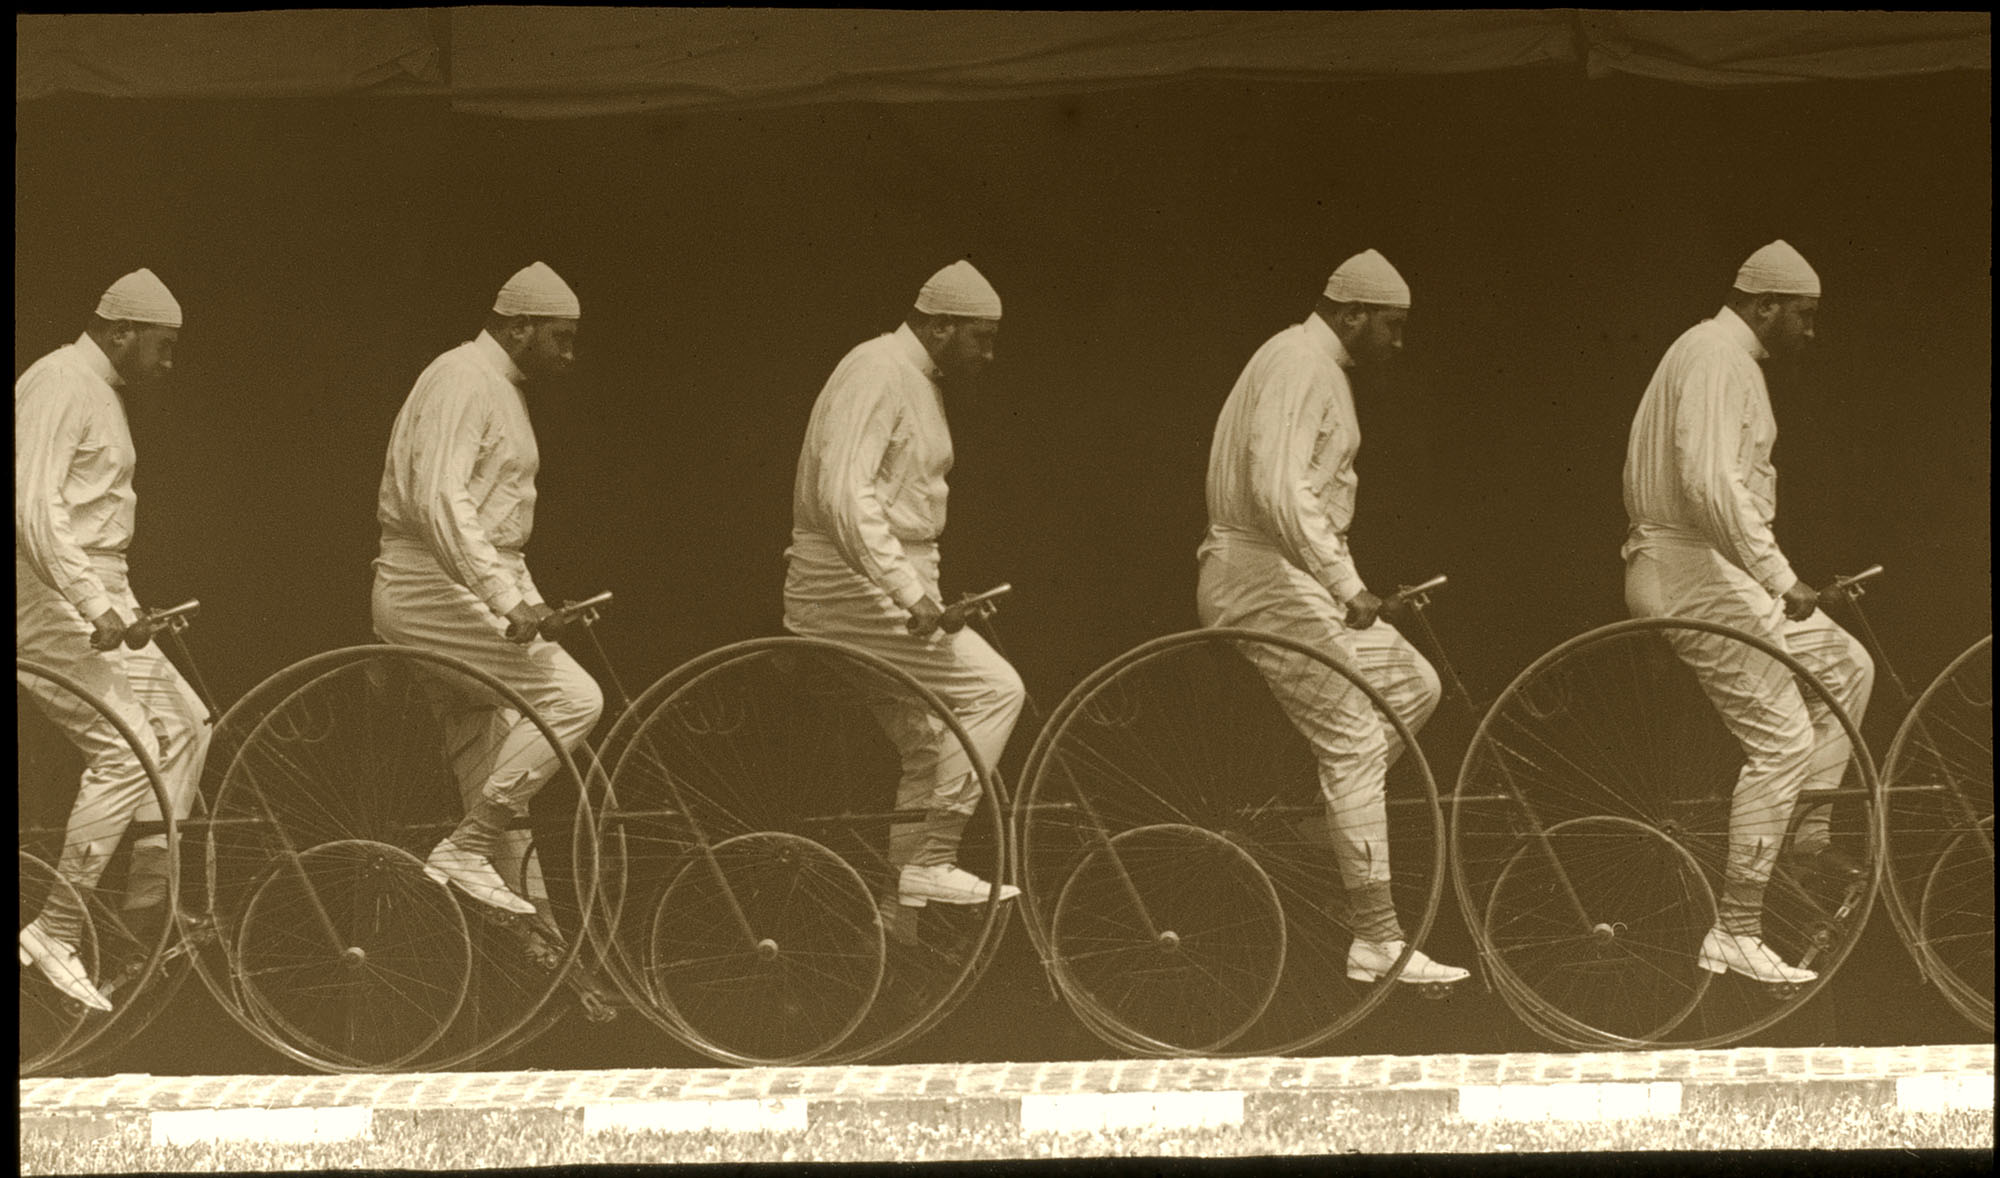 Étienne Jules Marey (French, 1830-1904) 'Chronophotograph of a Man on a Bicycle' c. 1885-1890